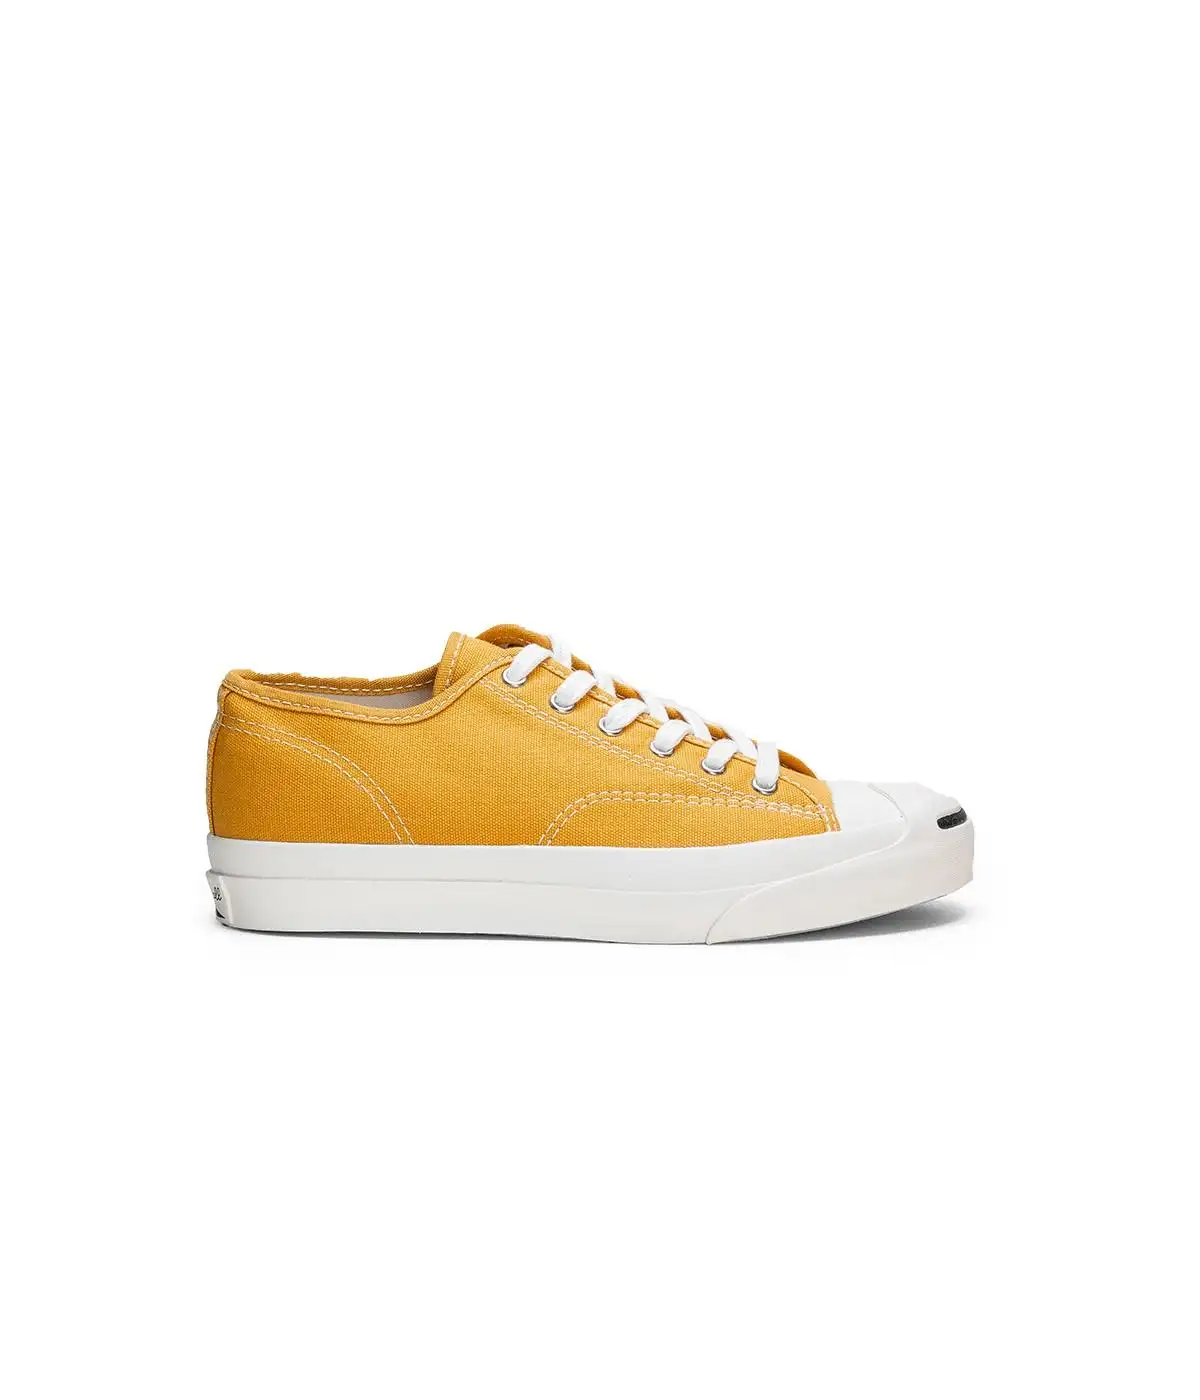 jack purcell lazada